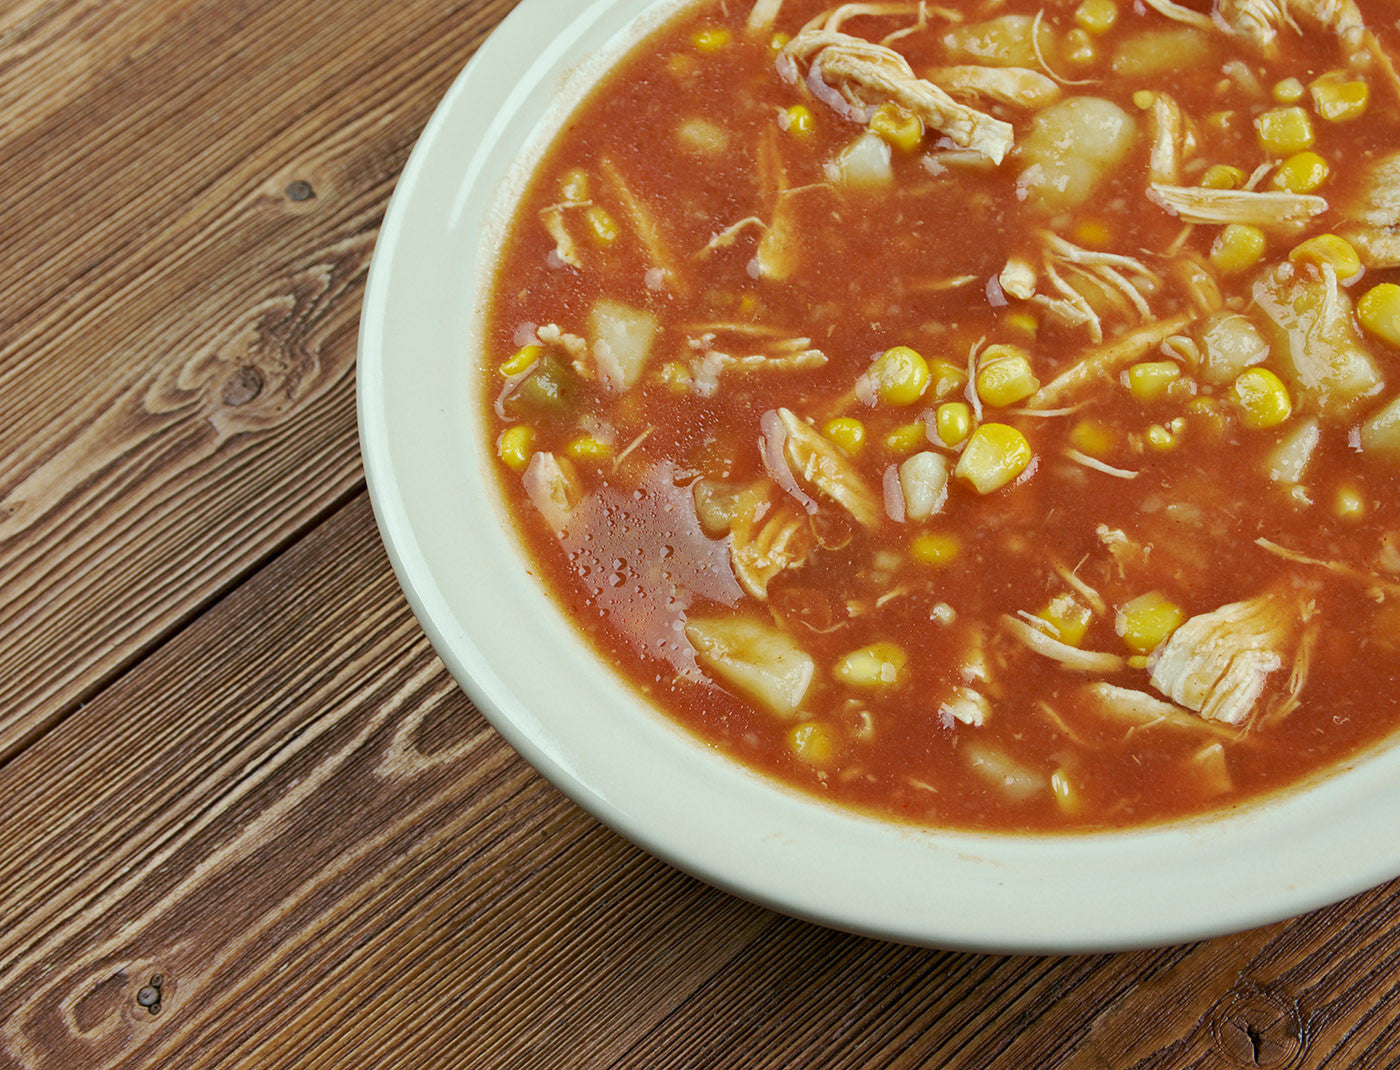 New Brunswick Stew, AKA "Leftover Stew Surprise!" Great in VitaClay!